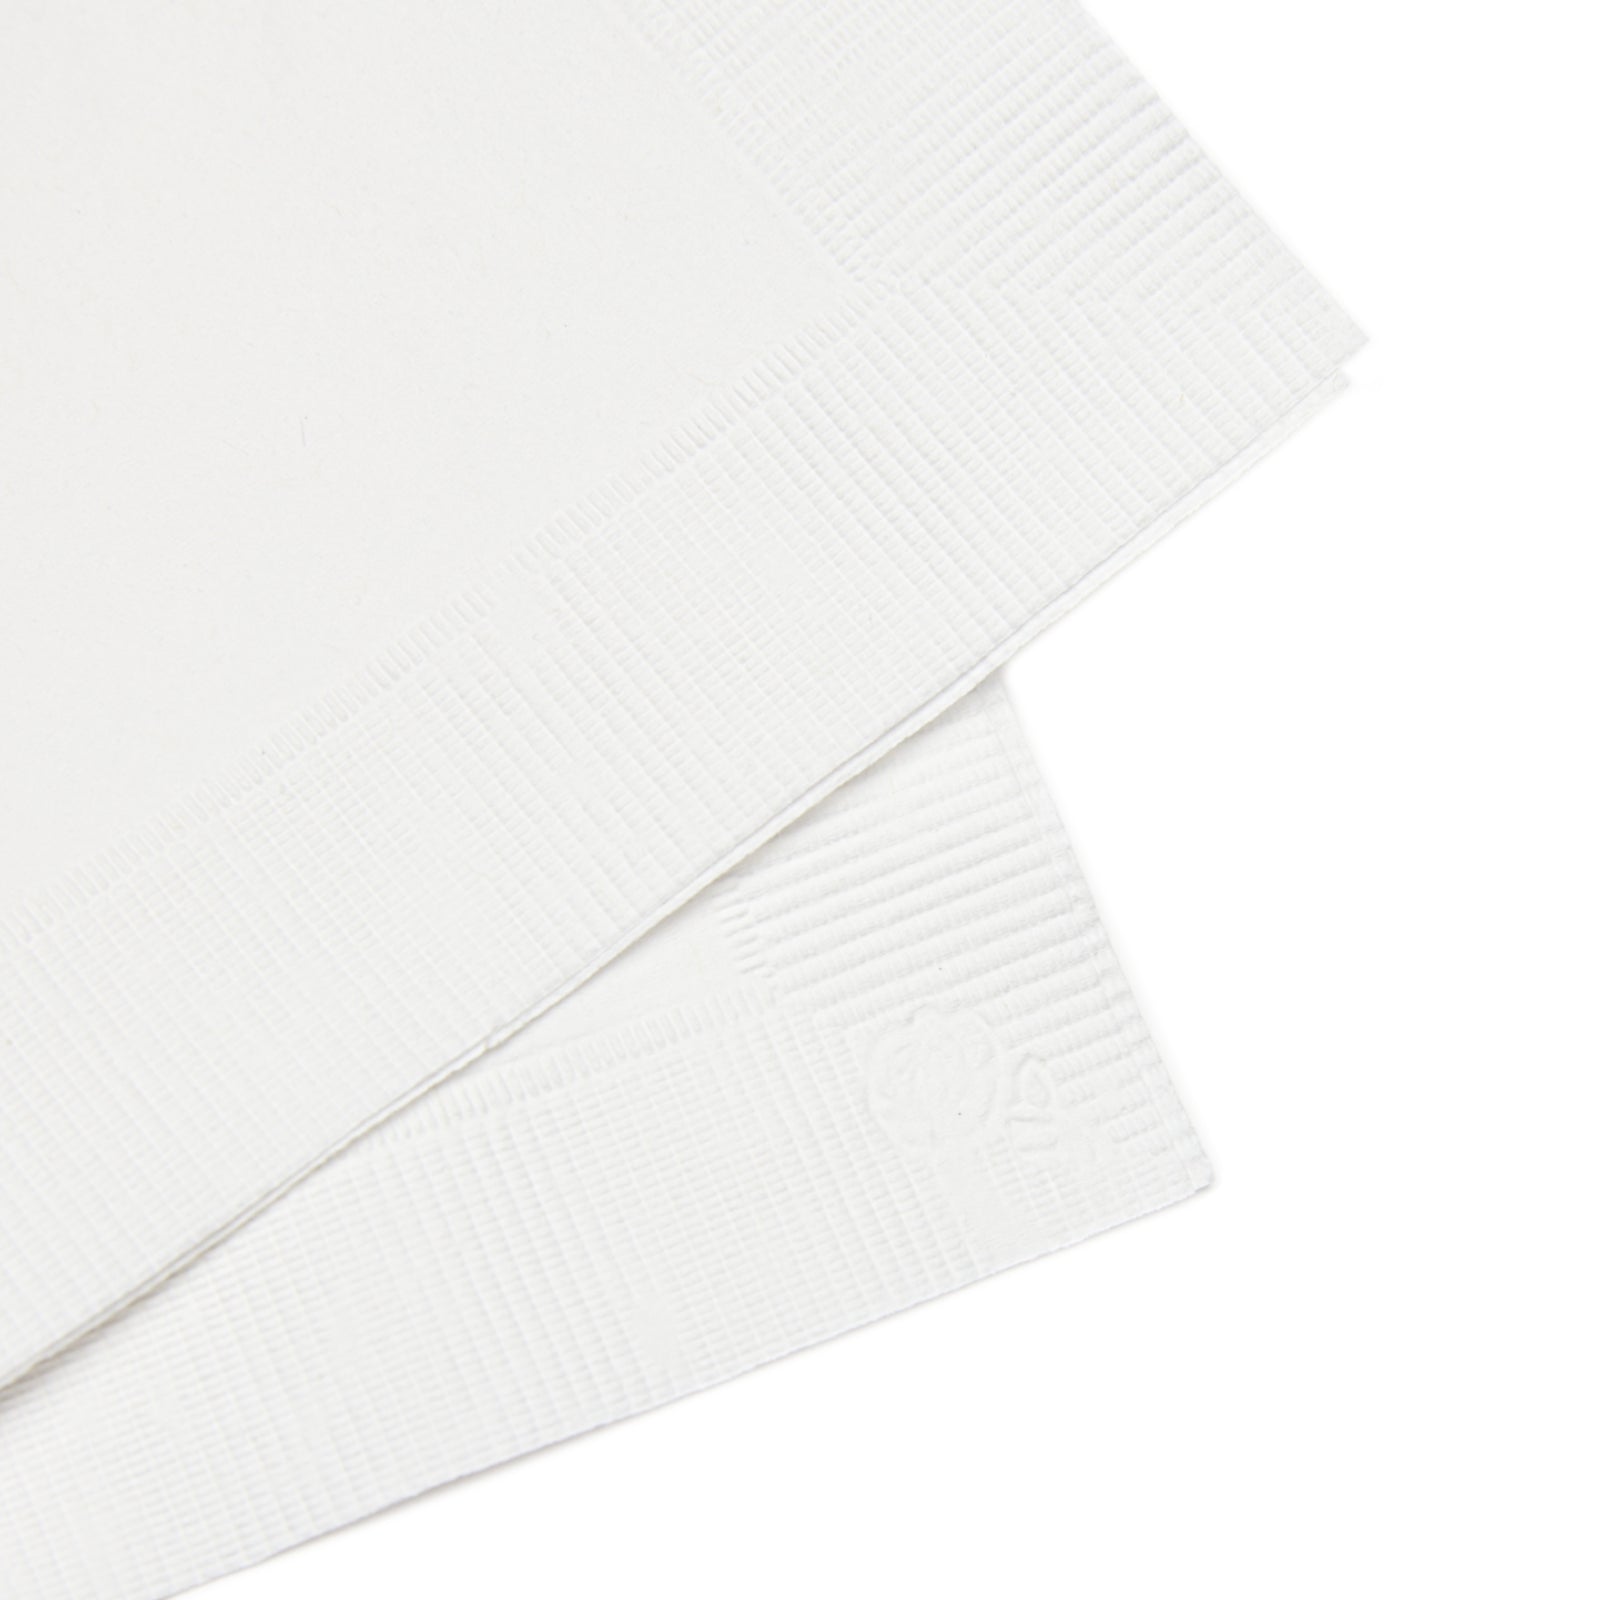 TRYKID White Coined Napkins